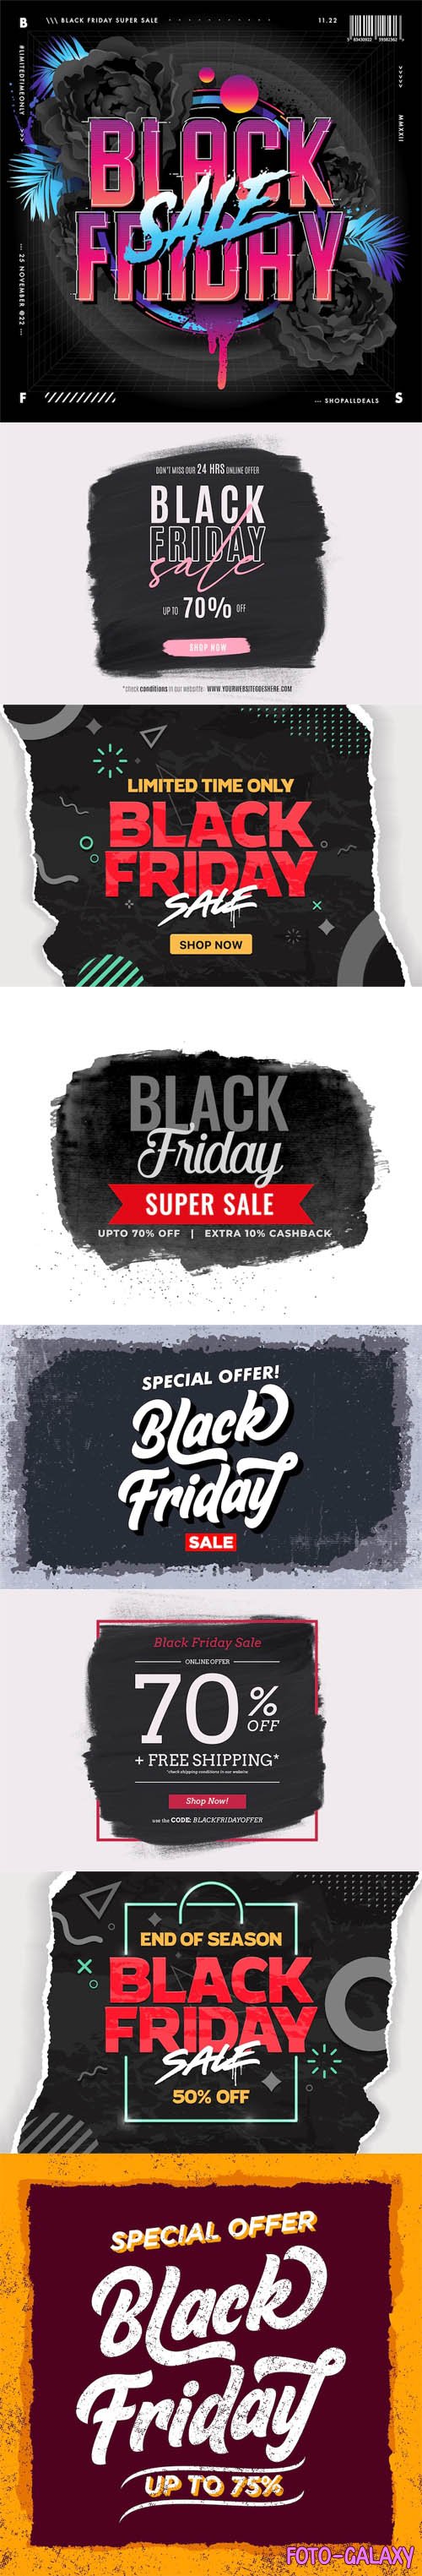 Black Friday - 10 Creative Banners & Backgrounds Vector Templates